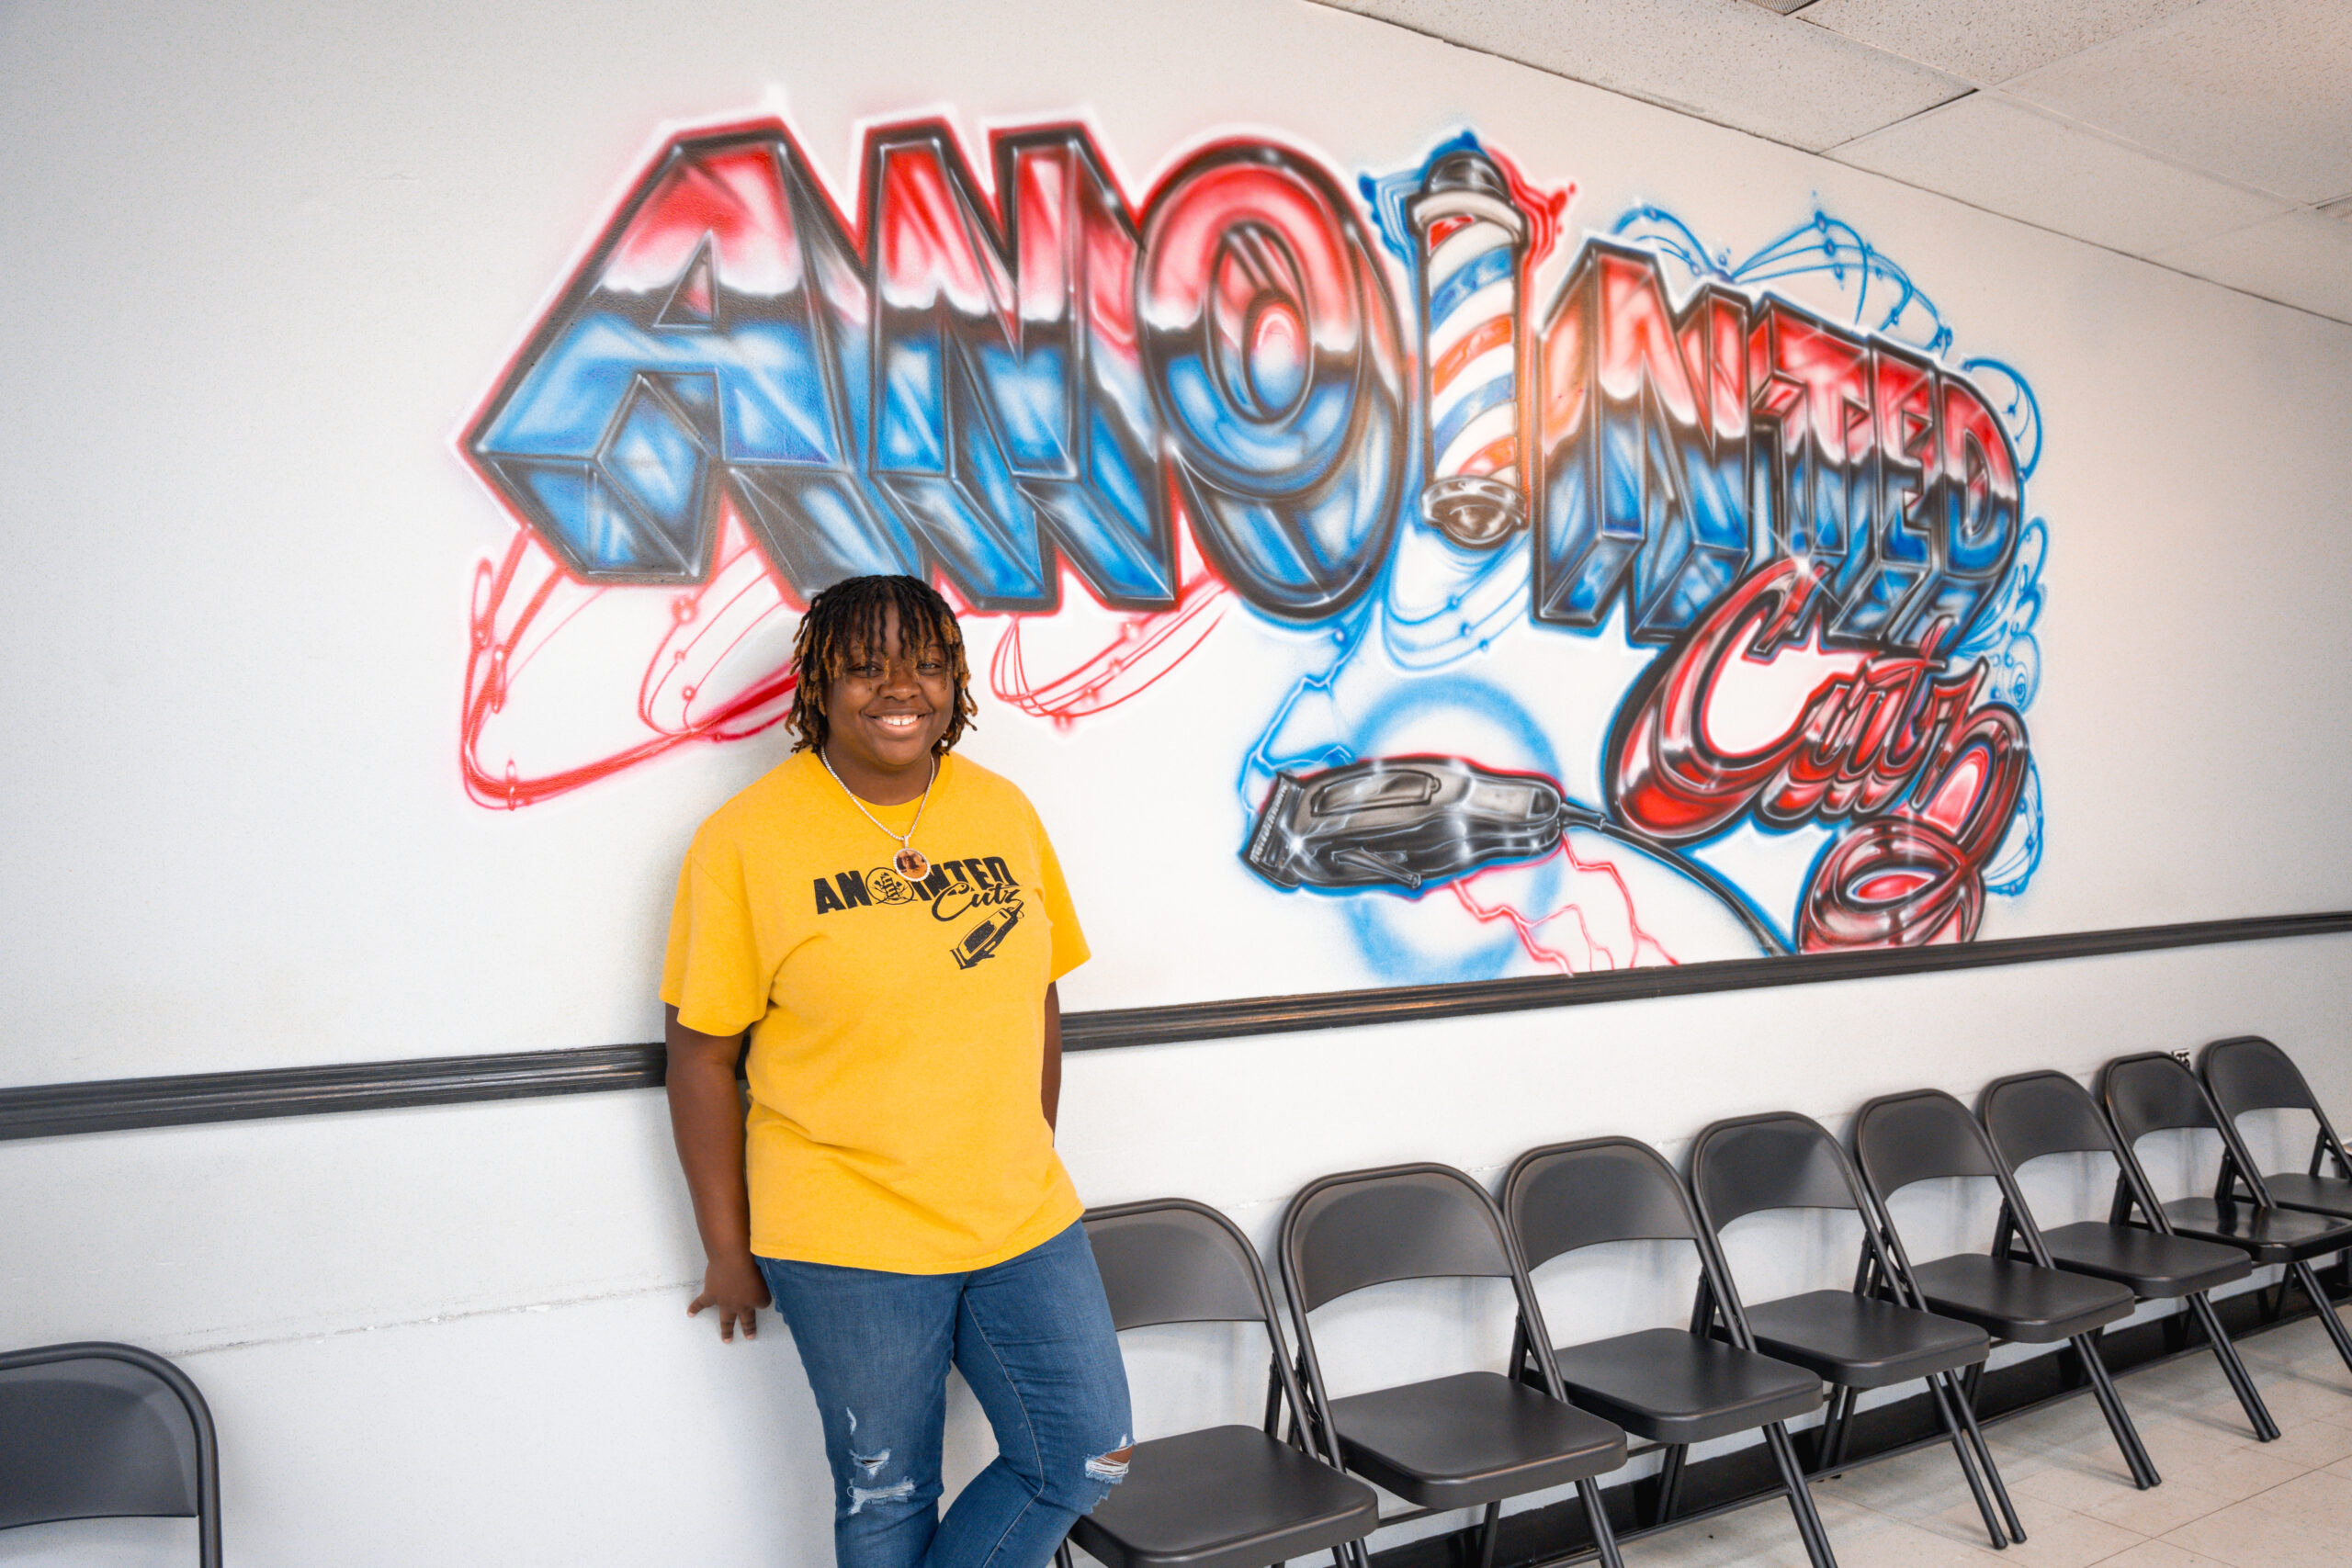 Shauna Greene poses in front of Anointed Cutz sign